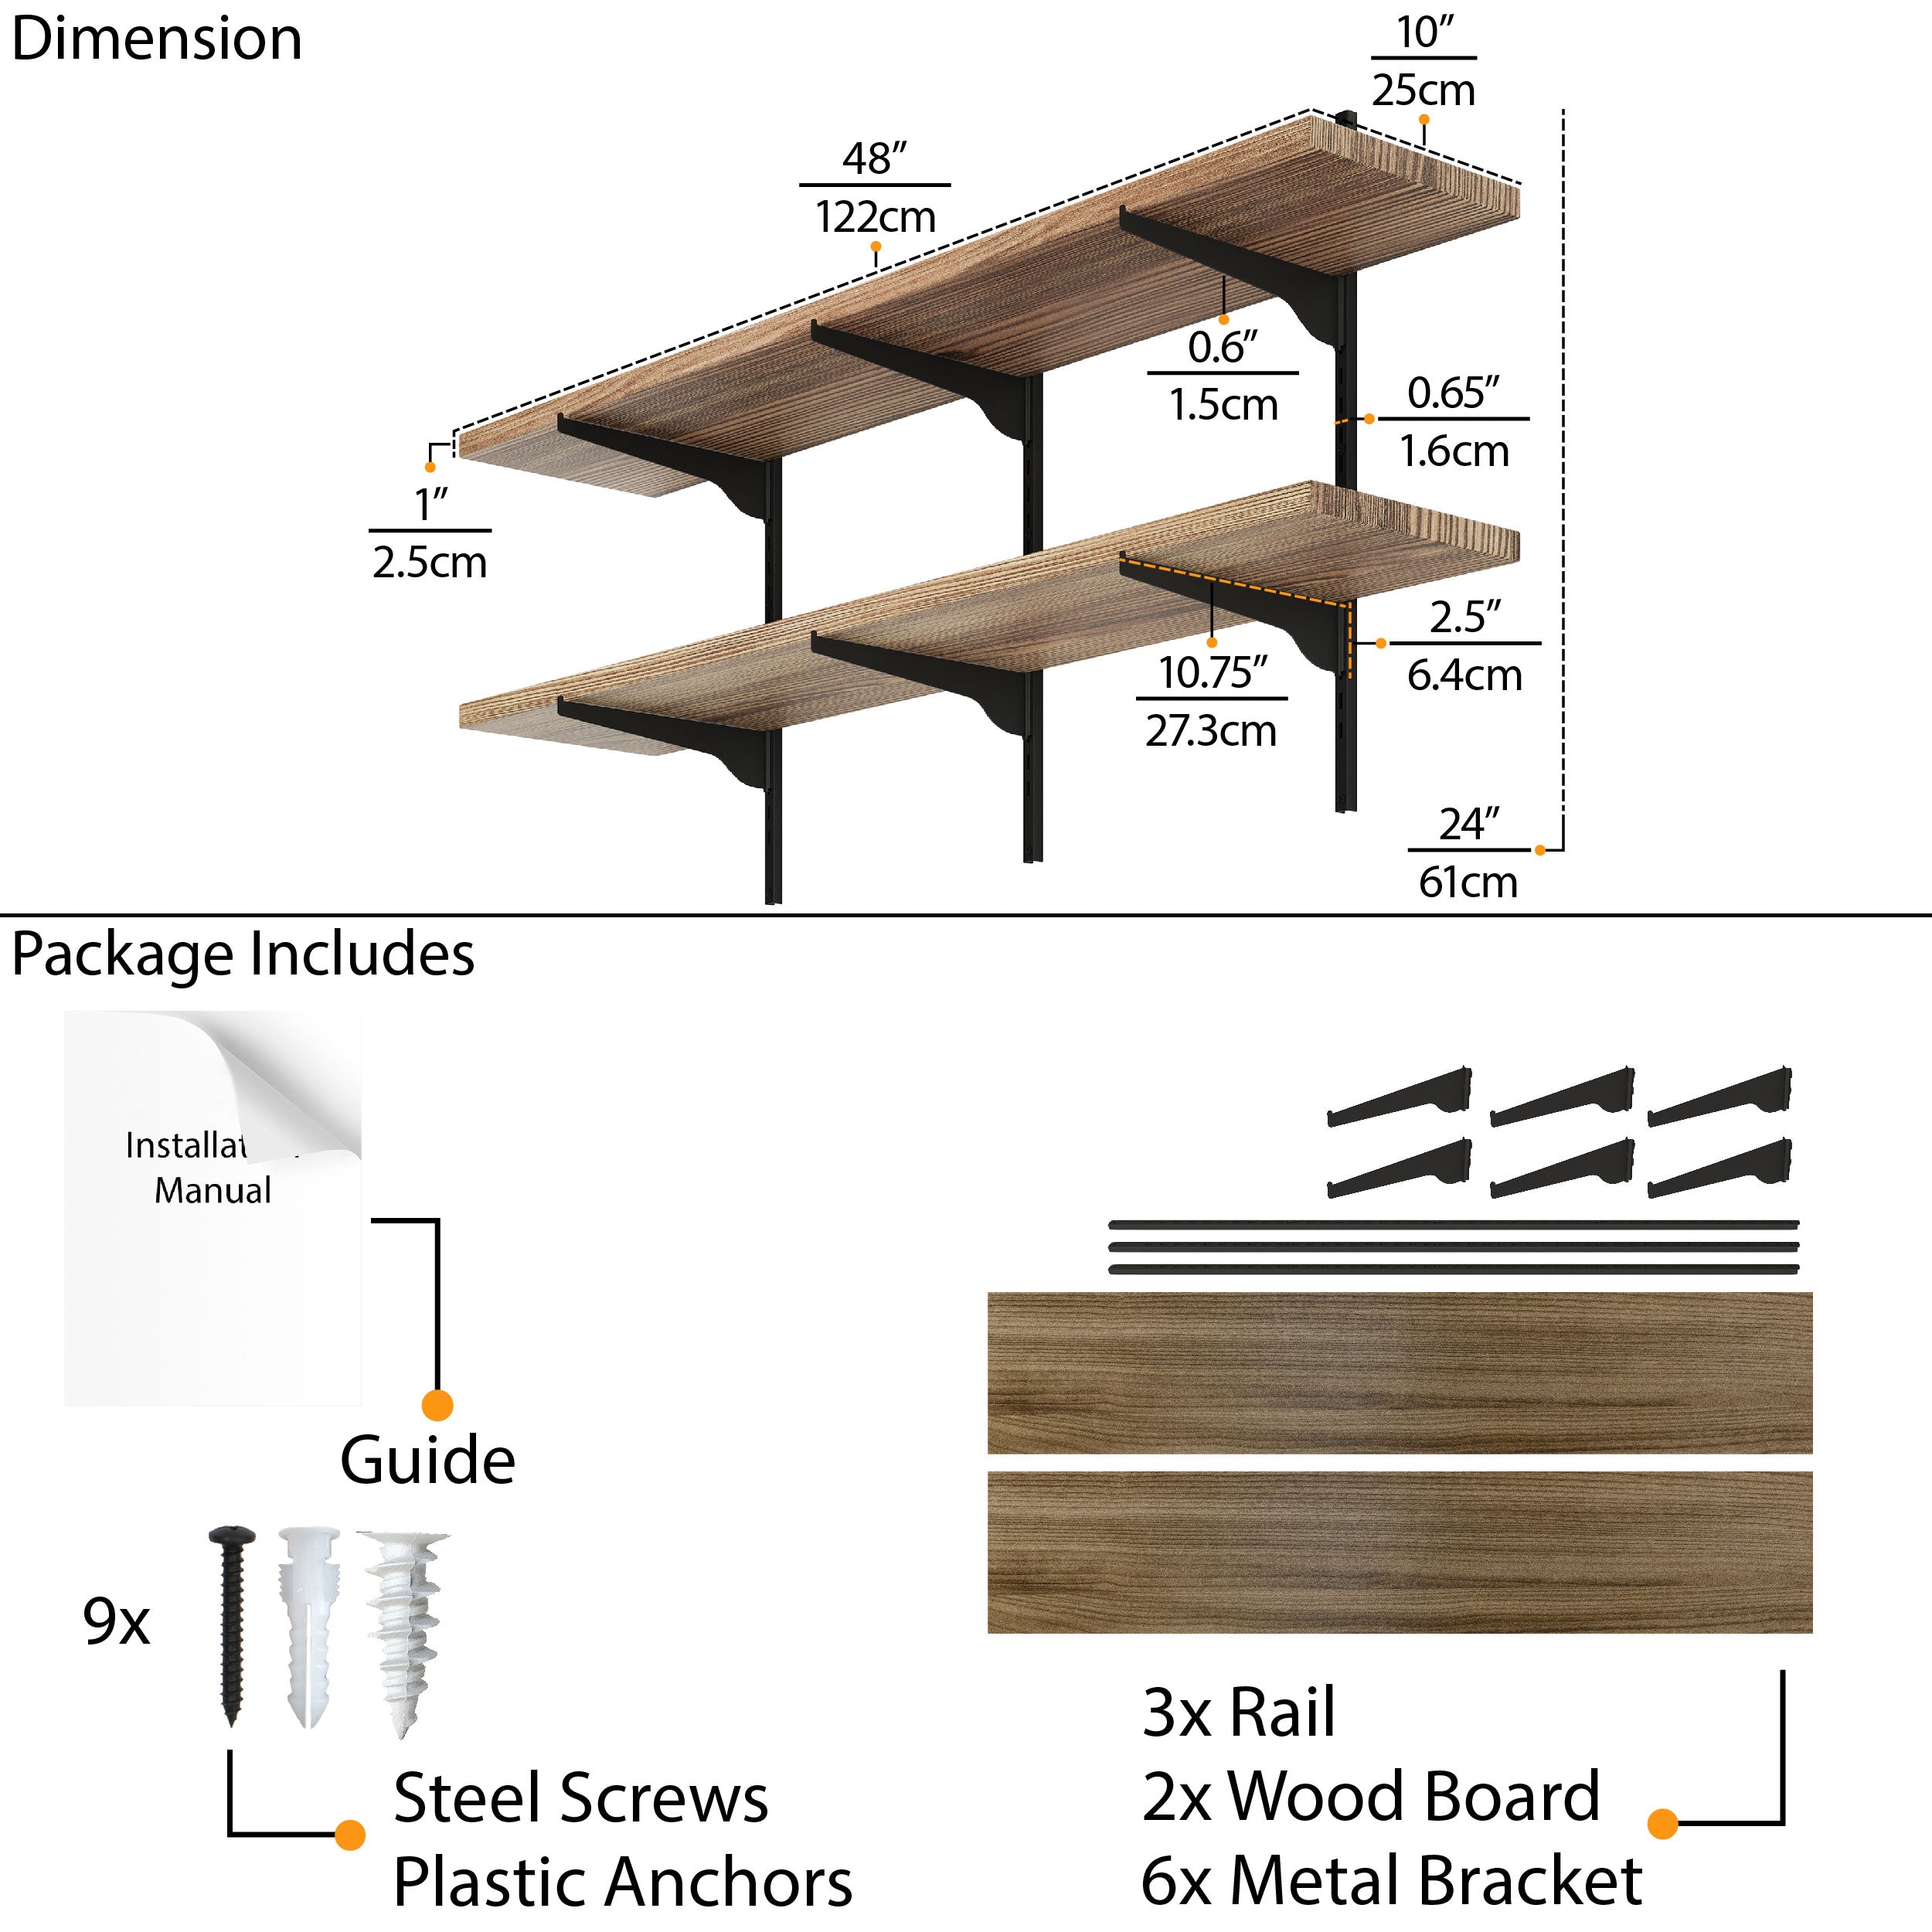 A diagram of 48'' wooden floating shelves, showing dimensions in inches and centimeters, with components list.